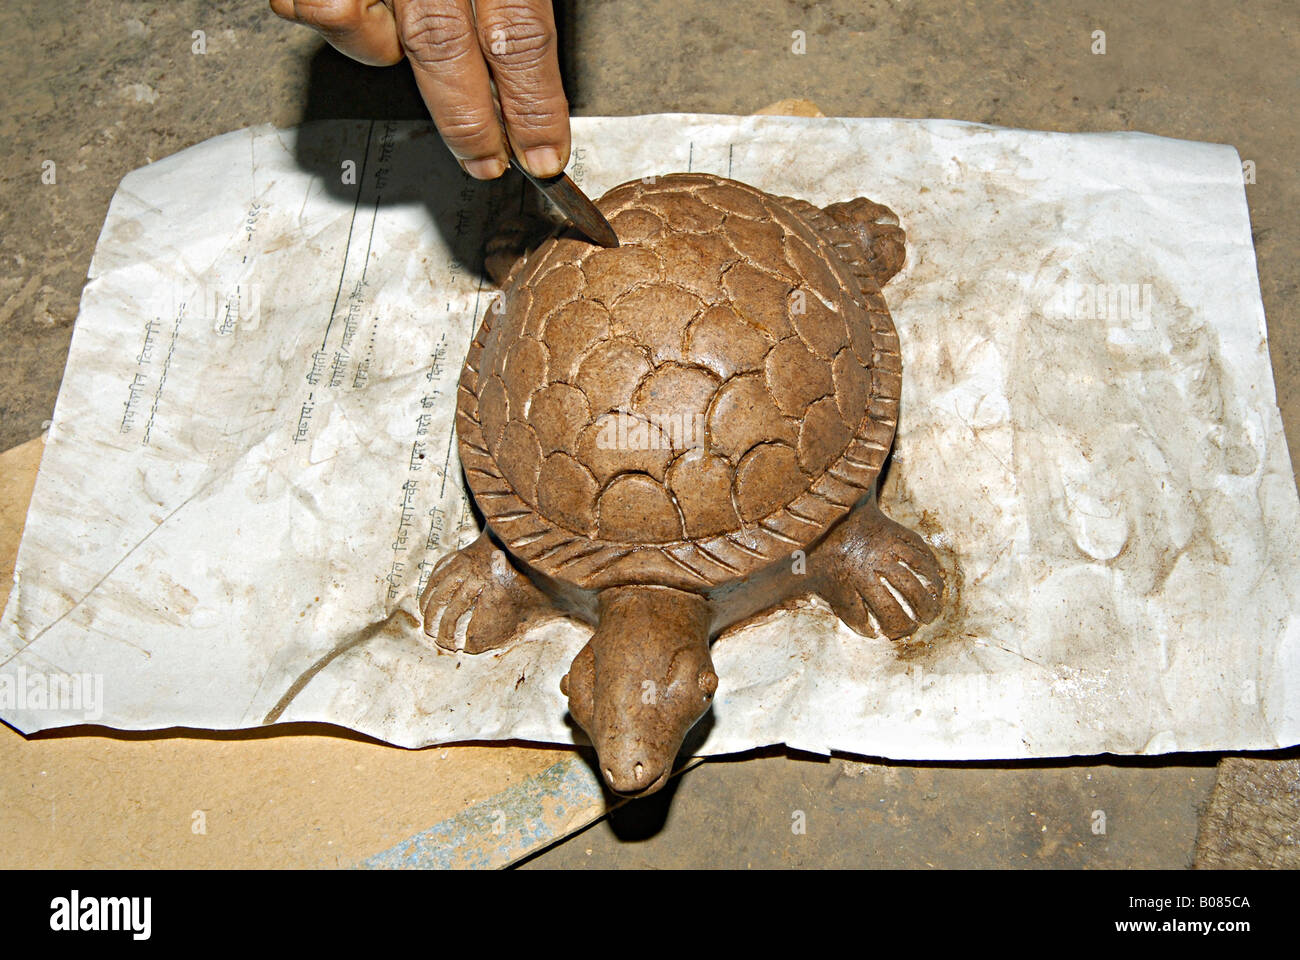 A Tortoise made out of paper Mache Art. Stock Photo